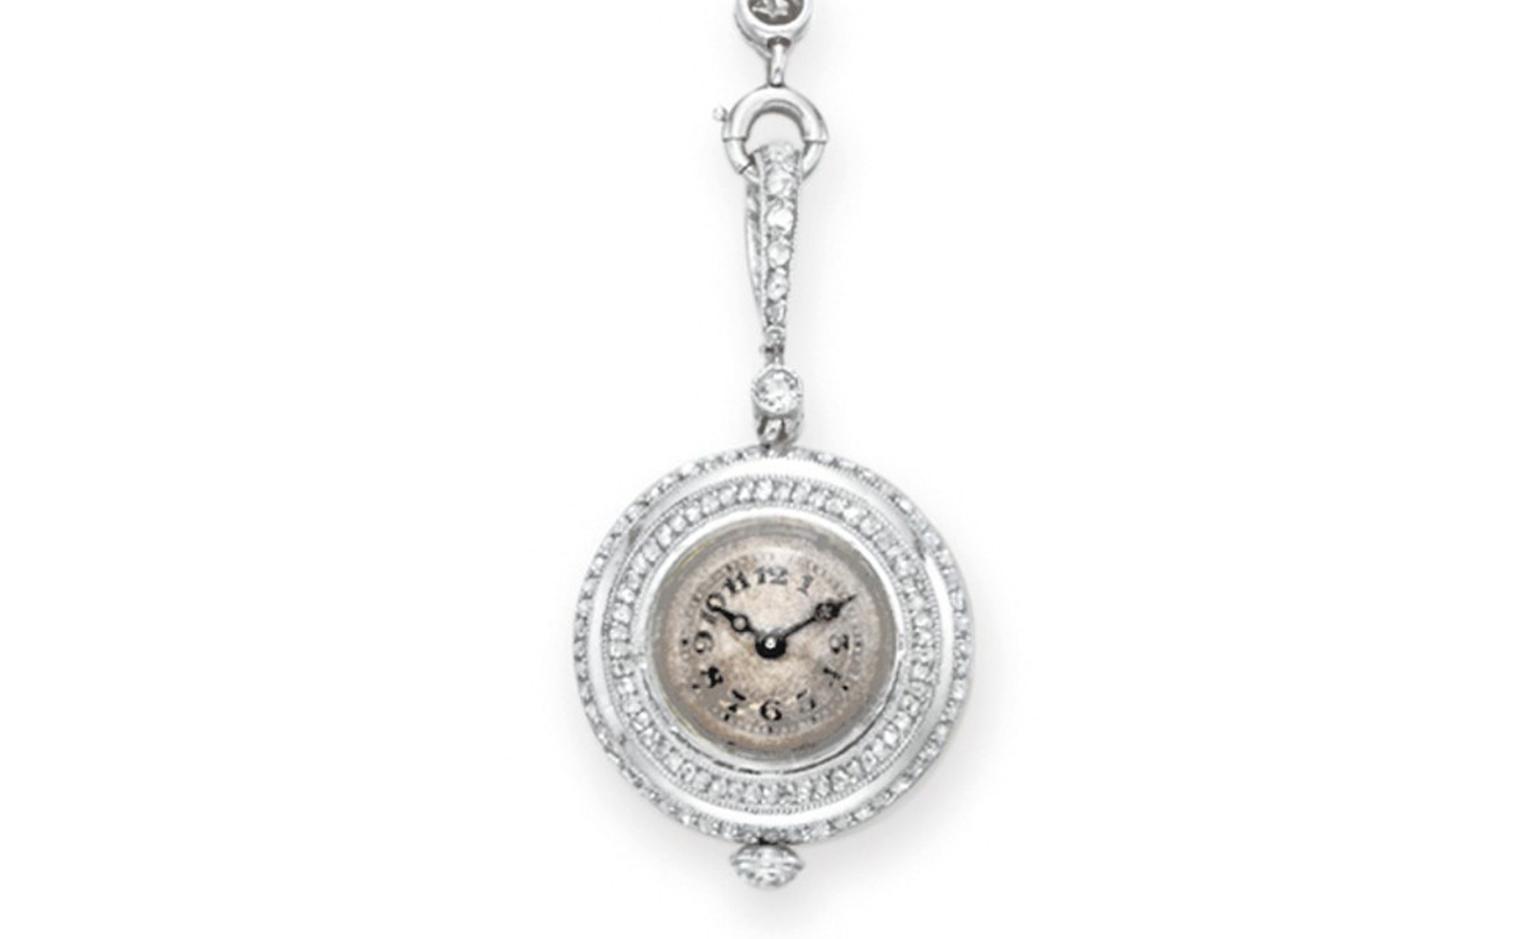 LOT 142 A BELLE EPOQUE PEARL AND DIAMOND PENDANT WATCH NECKLACE S circa 1910, 19 ins., with French assay marks Estimate $15,000-$20,000